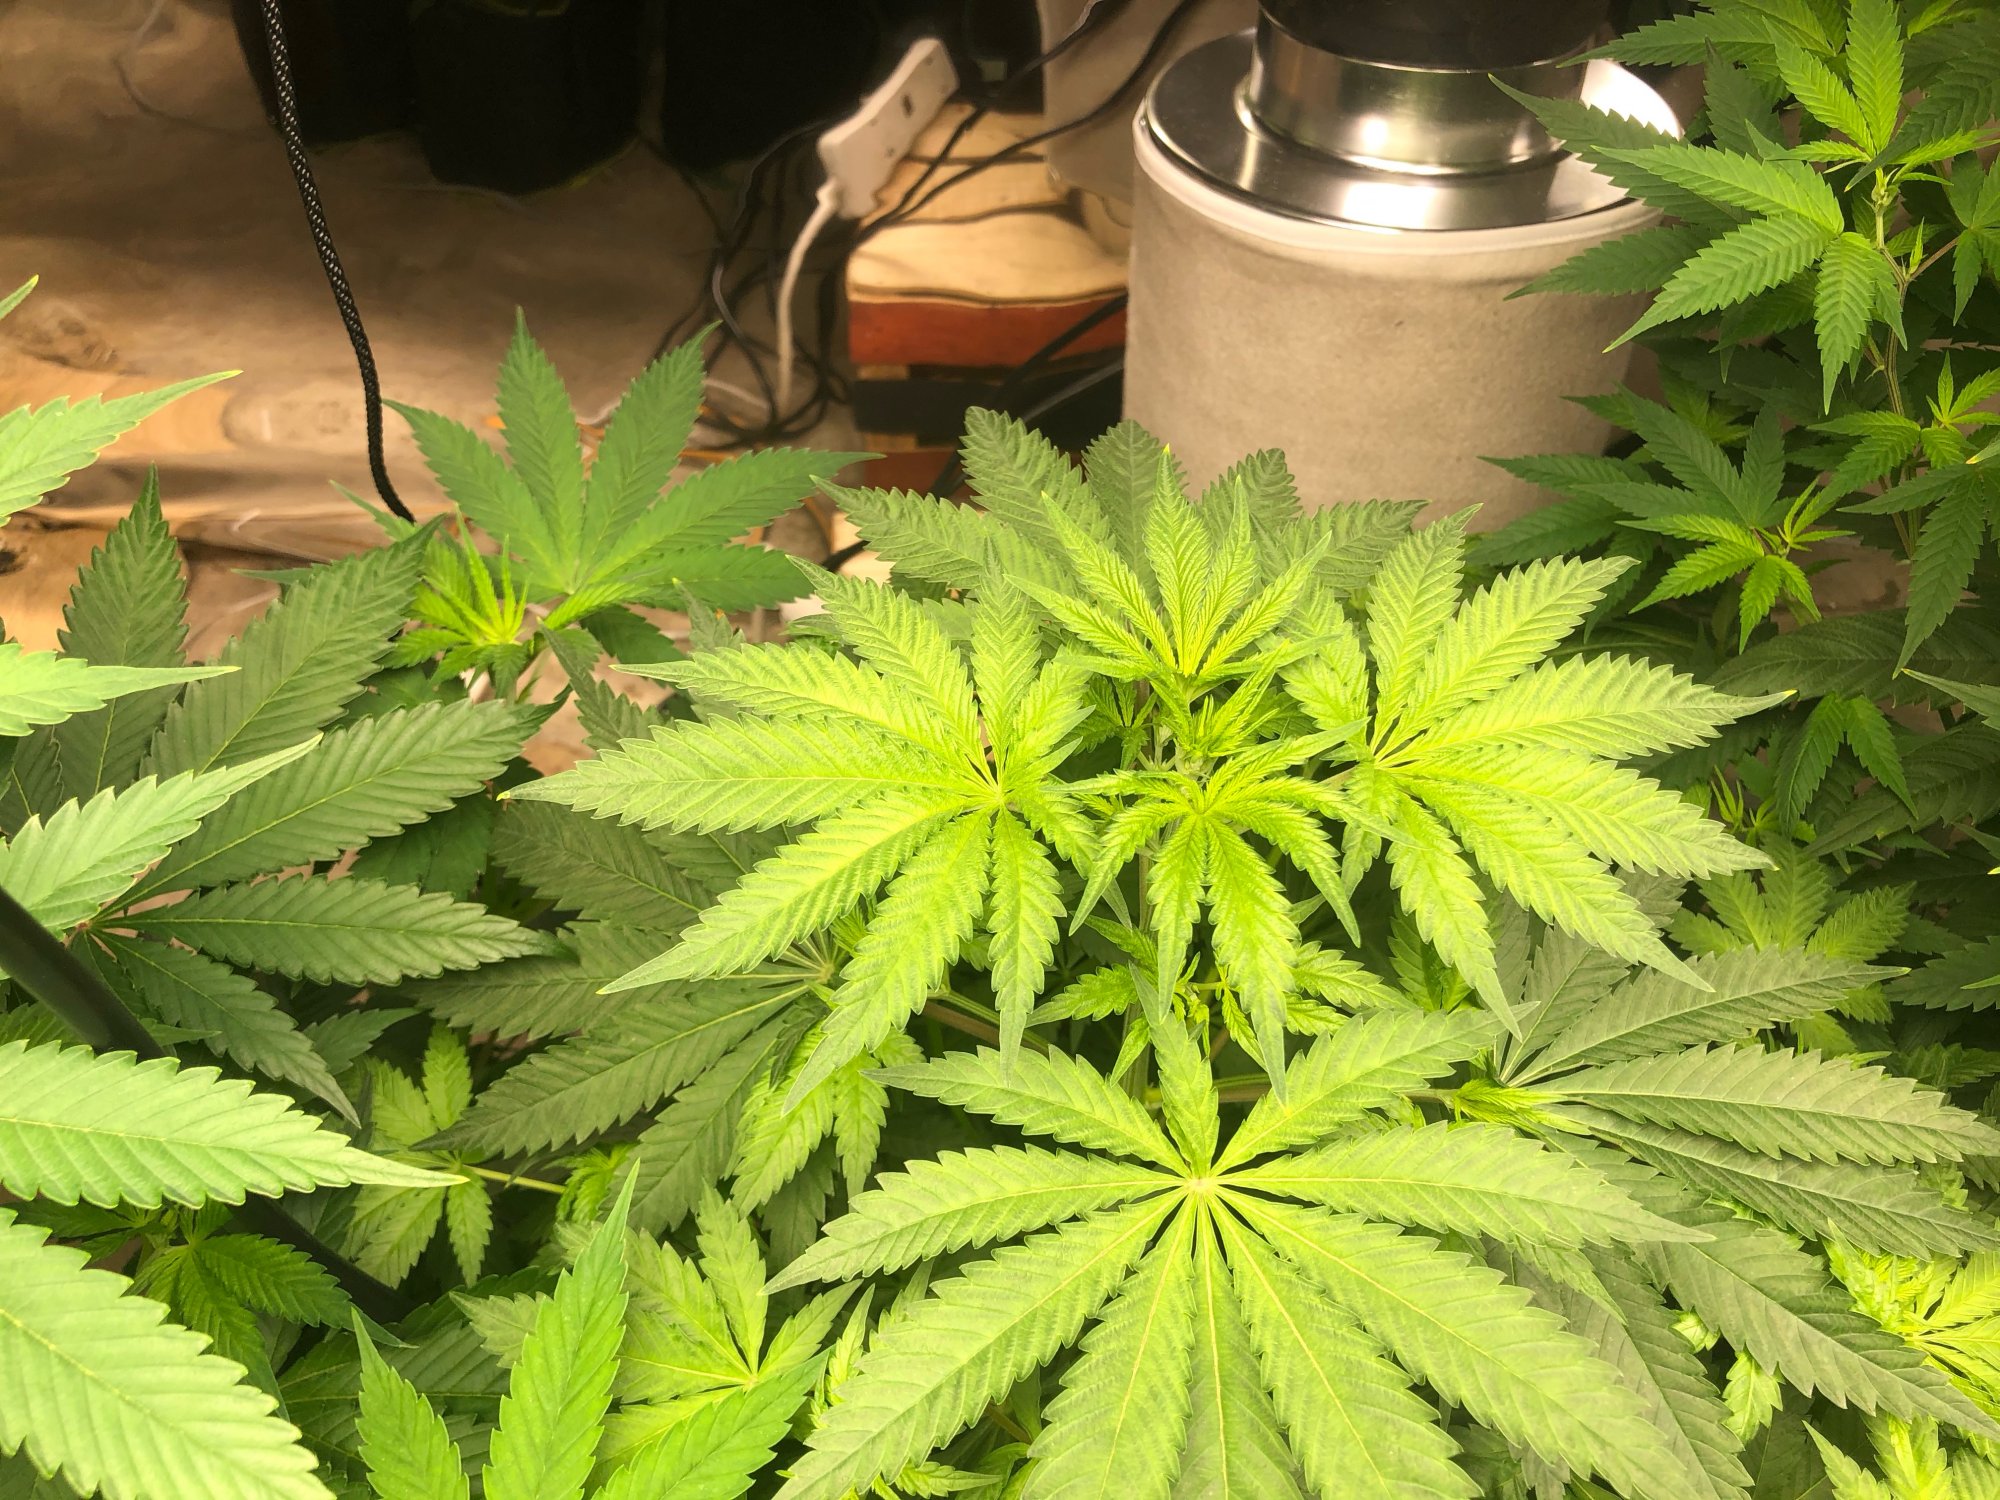 Hi please help me out first grow 3